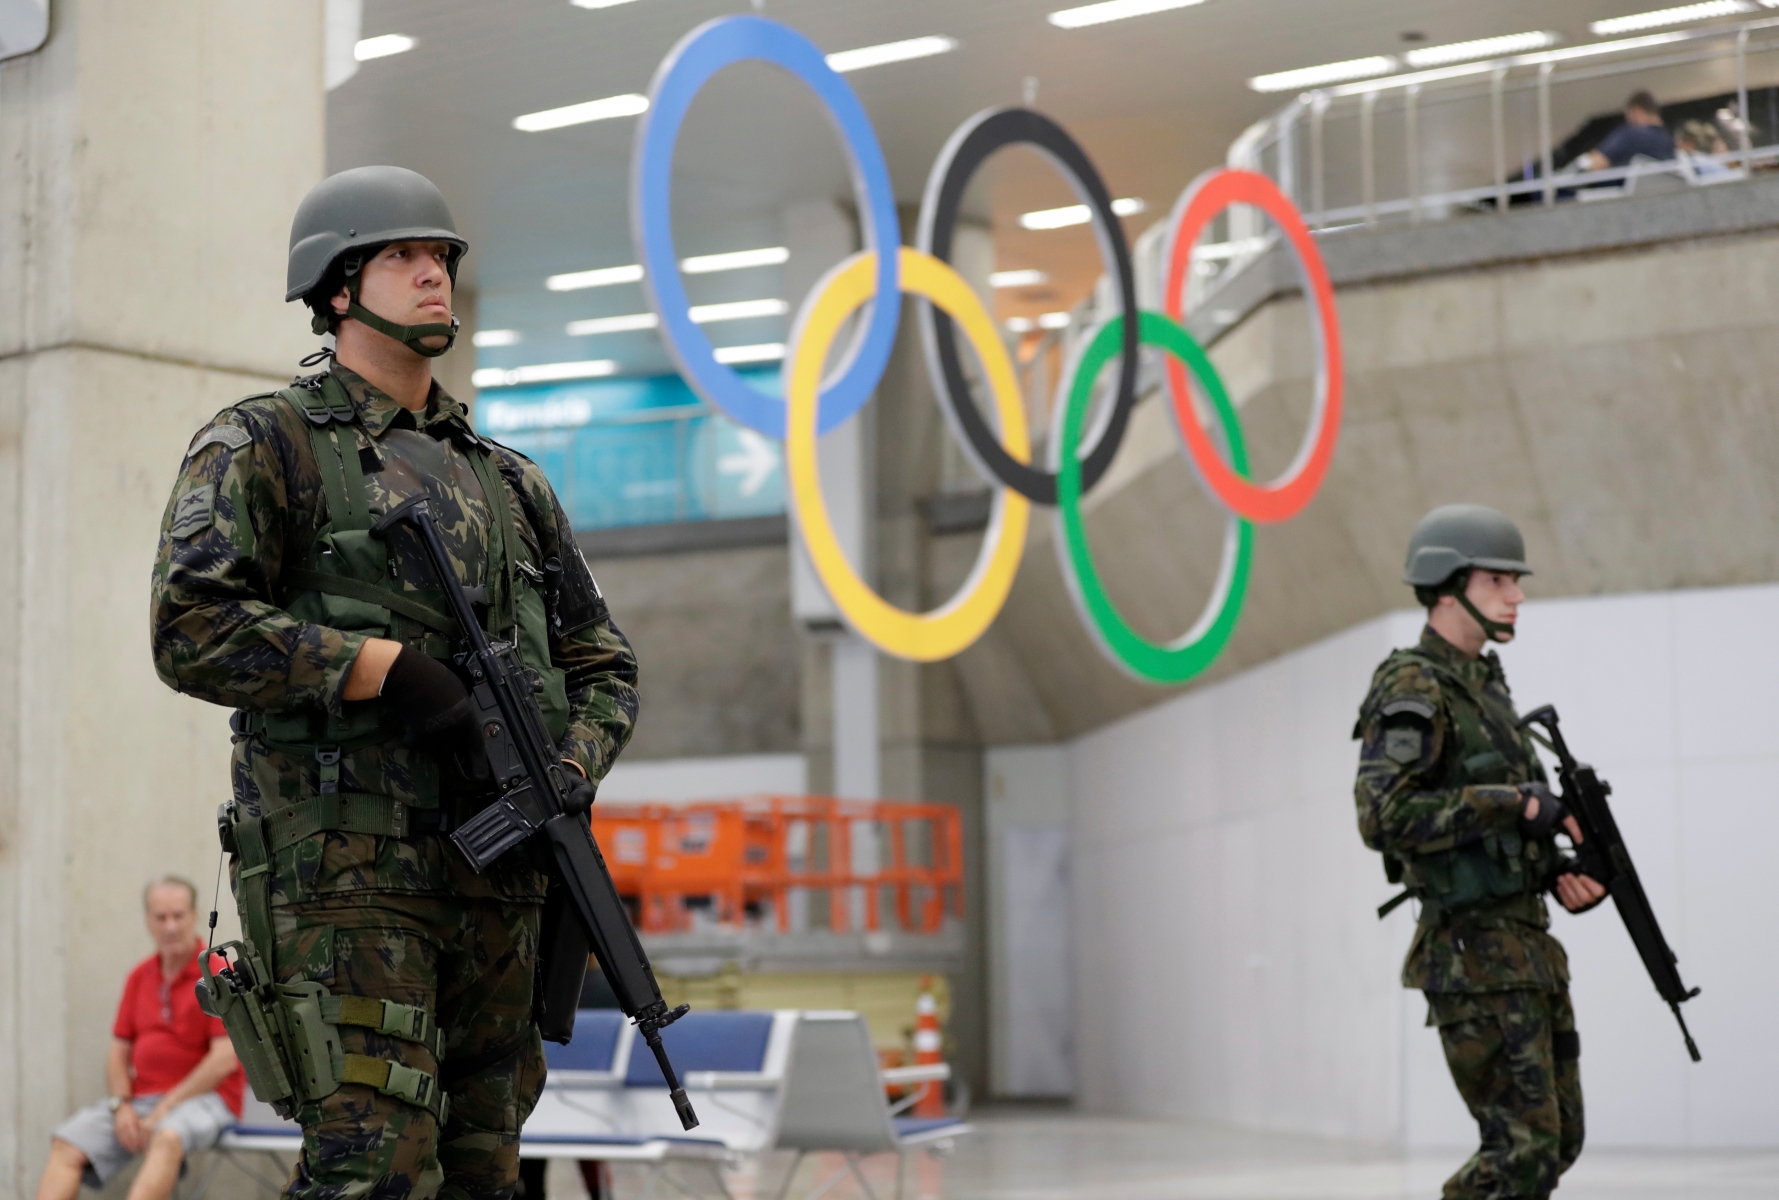 Brazilian soldiers patrol in the Rio de Janeiro International Airport ahead of the 2016 Summer Olympics in Rio de Janeiro, Brazil, Tuesday, Aug. 2, 2016. The Olympics is scheduled to open Aug. 5. (AP Photo/Gregory Bull) Rio Olympics